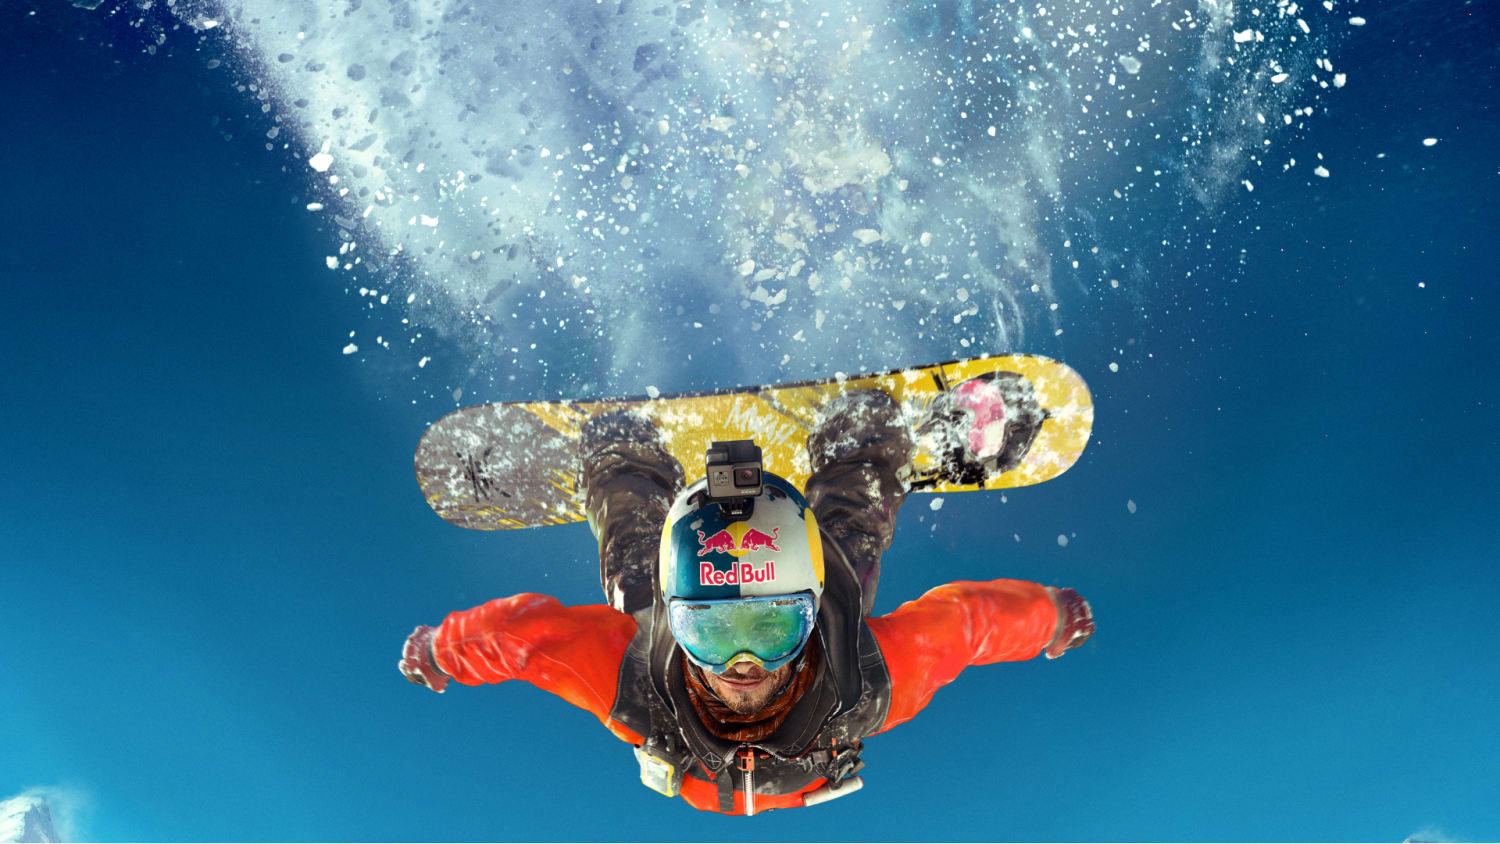 dominate domain I lost my way Best snowboarding games of all time: 5 you need to play